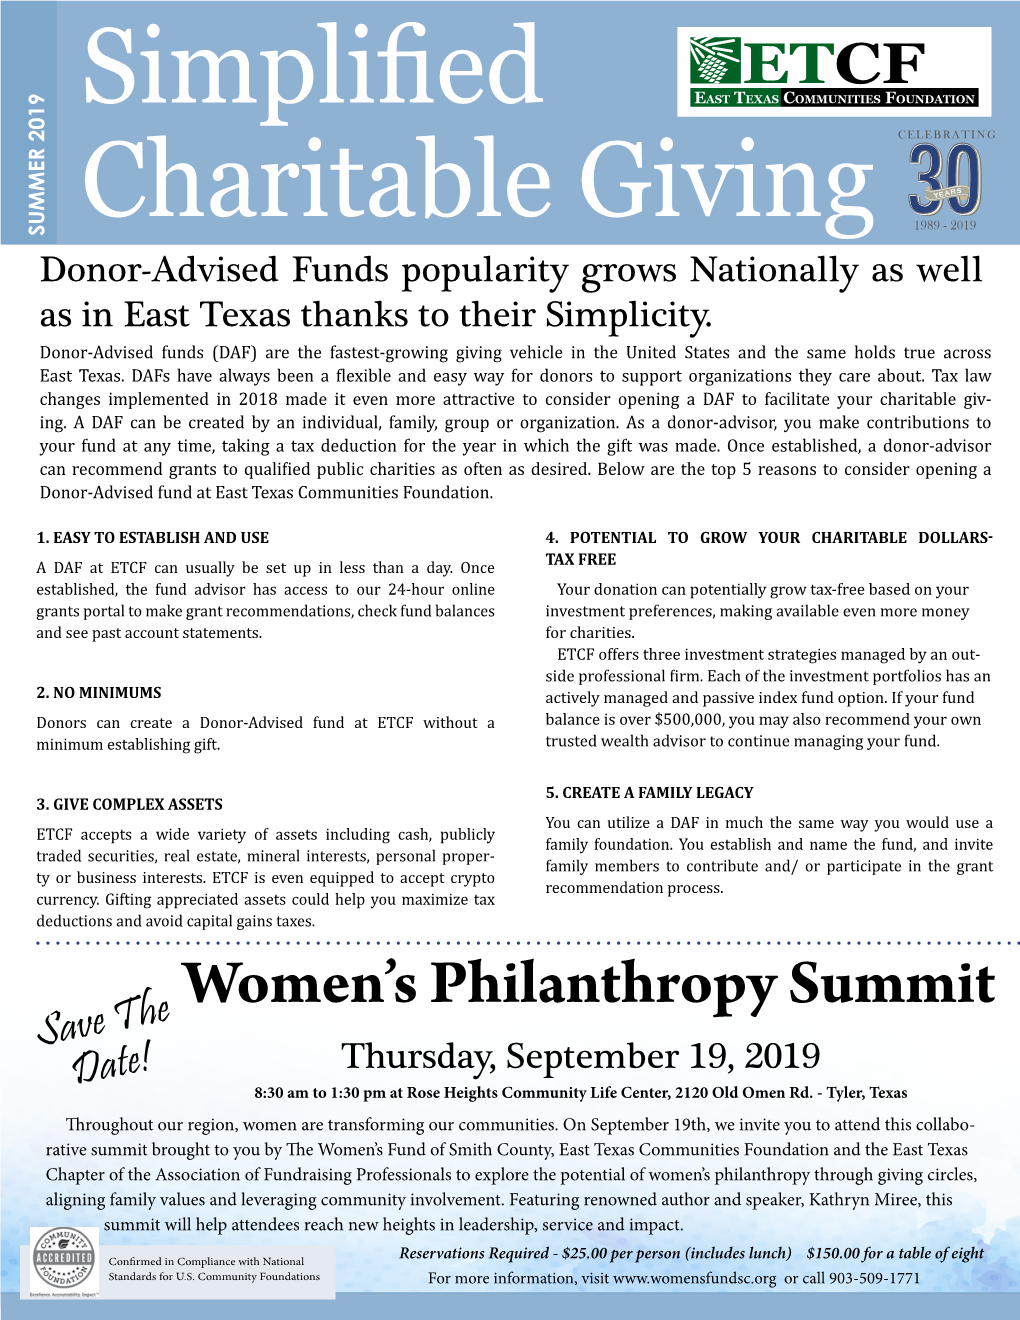 Simplified Charitable Giving